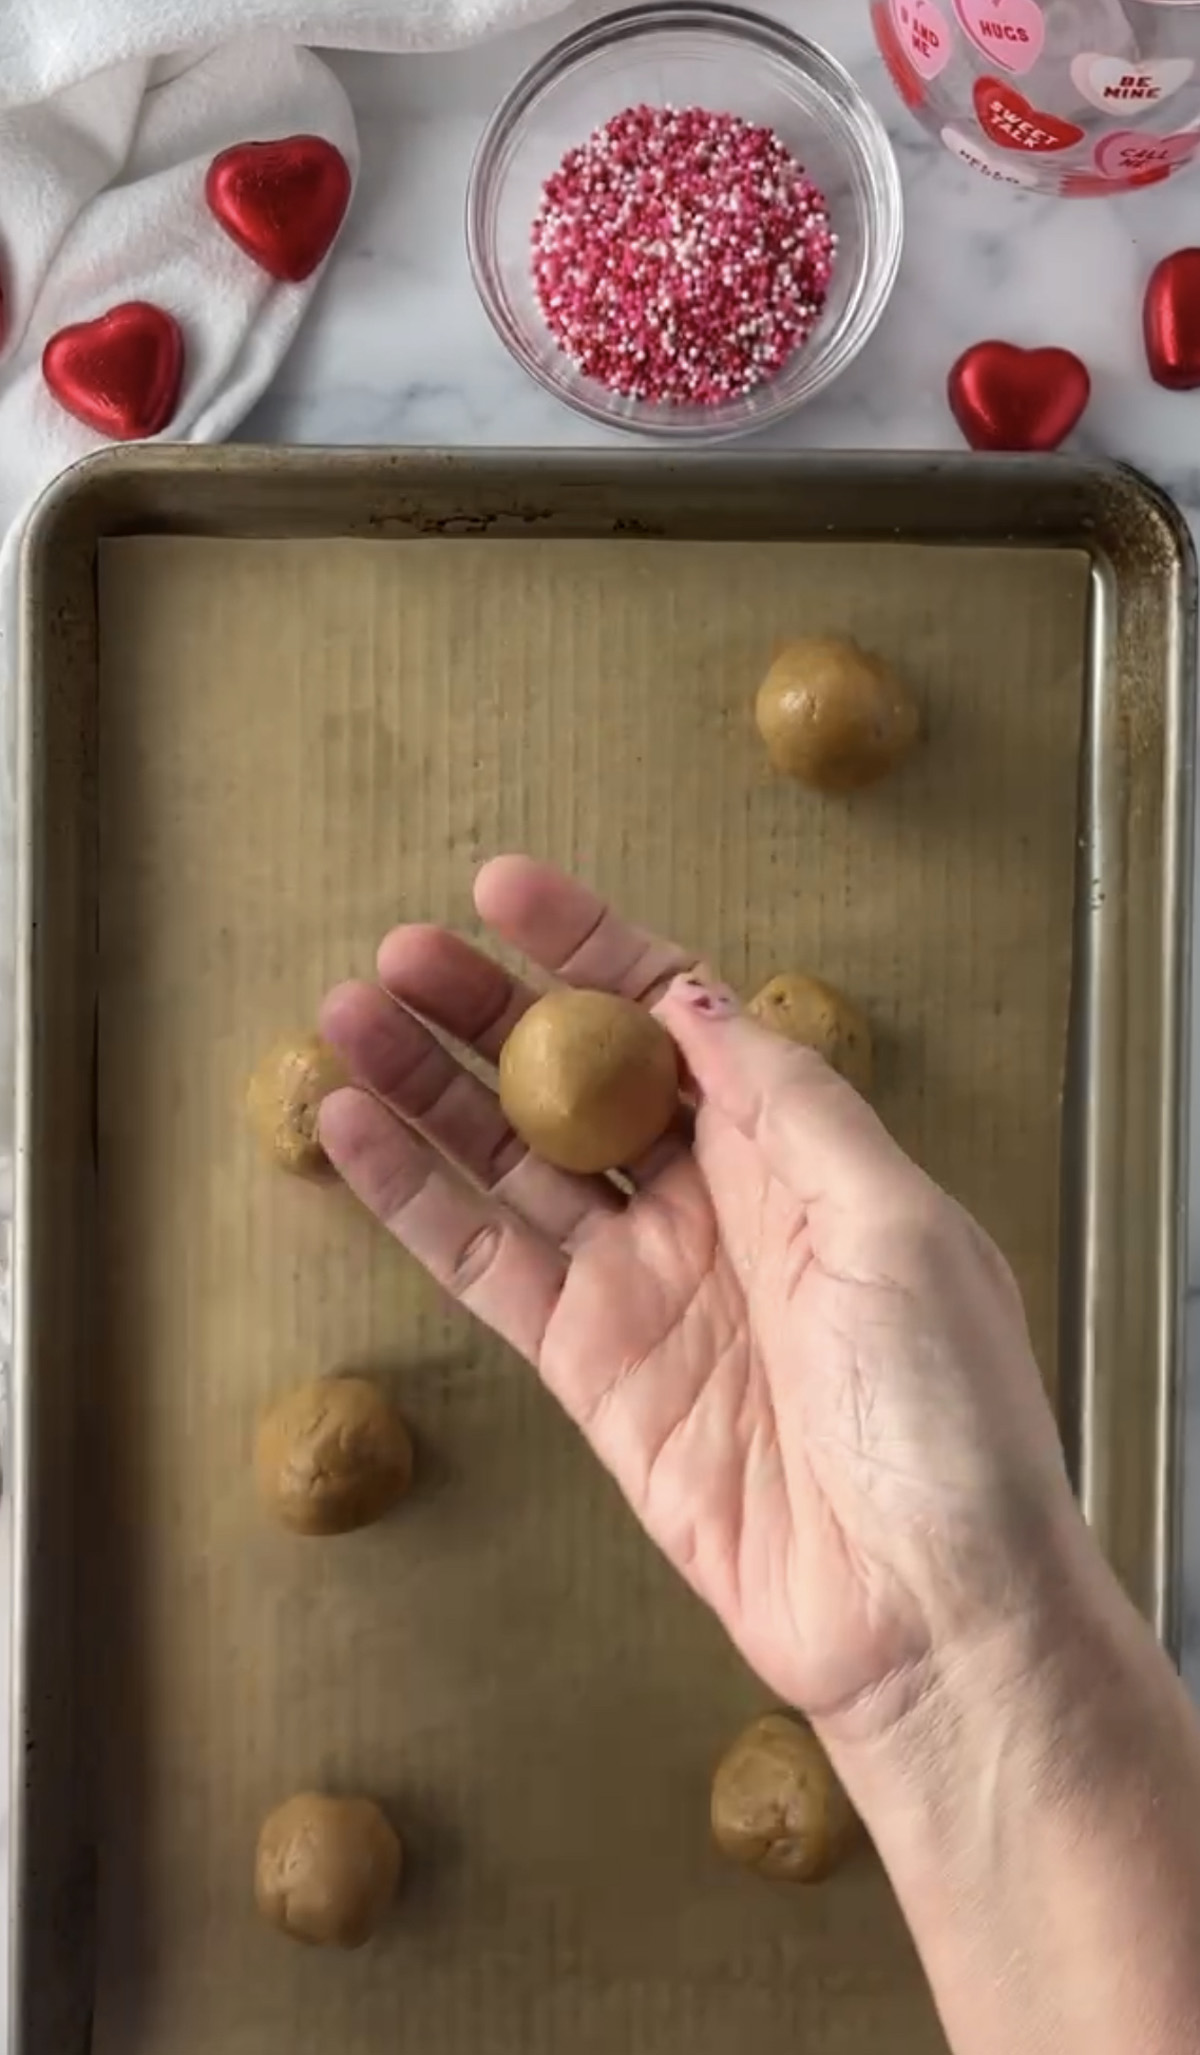 Rolling peanut butter balls with hands.